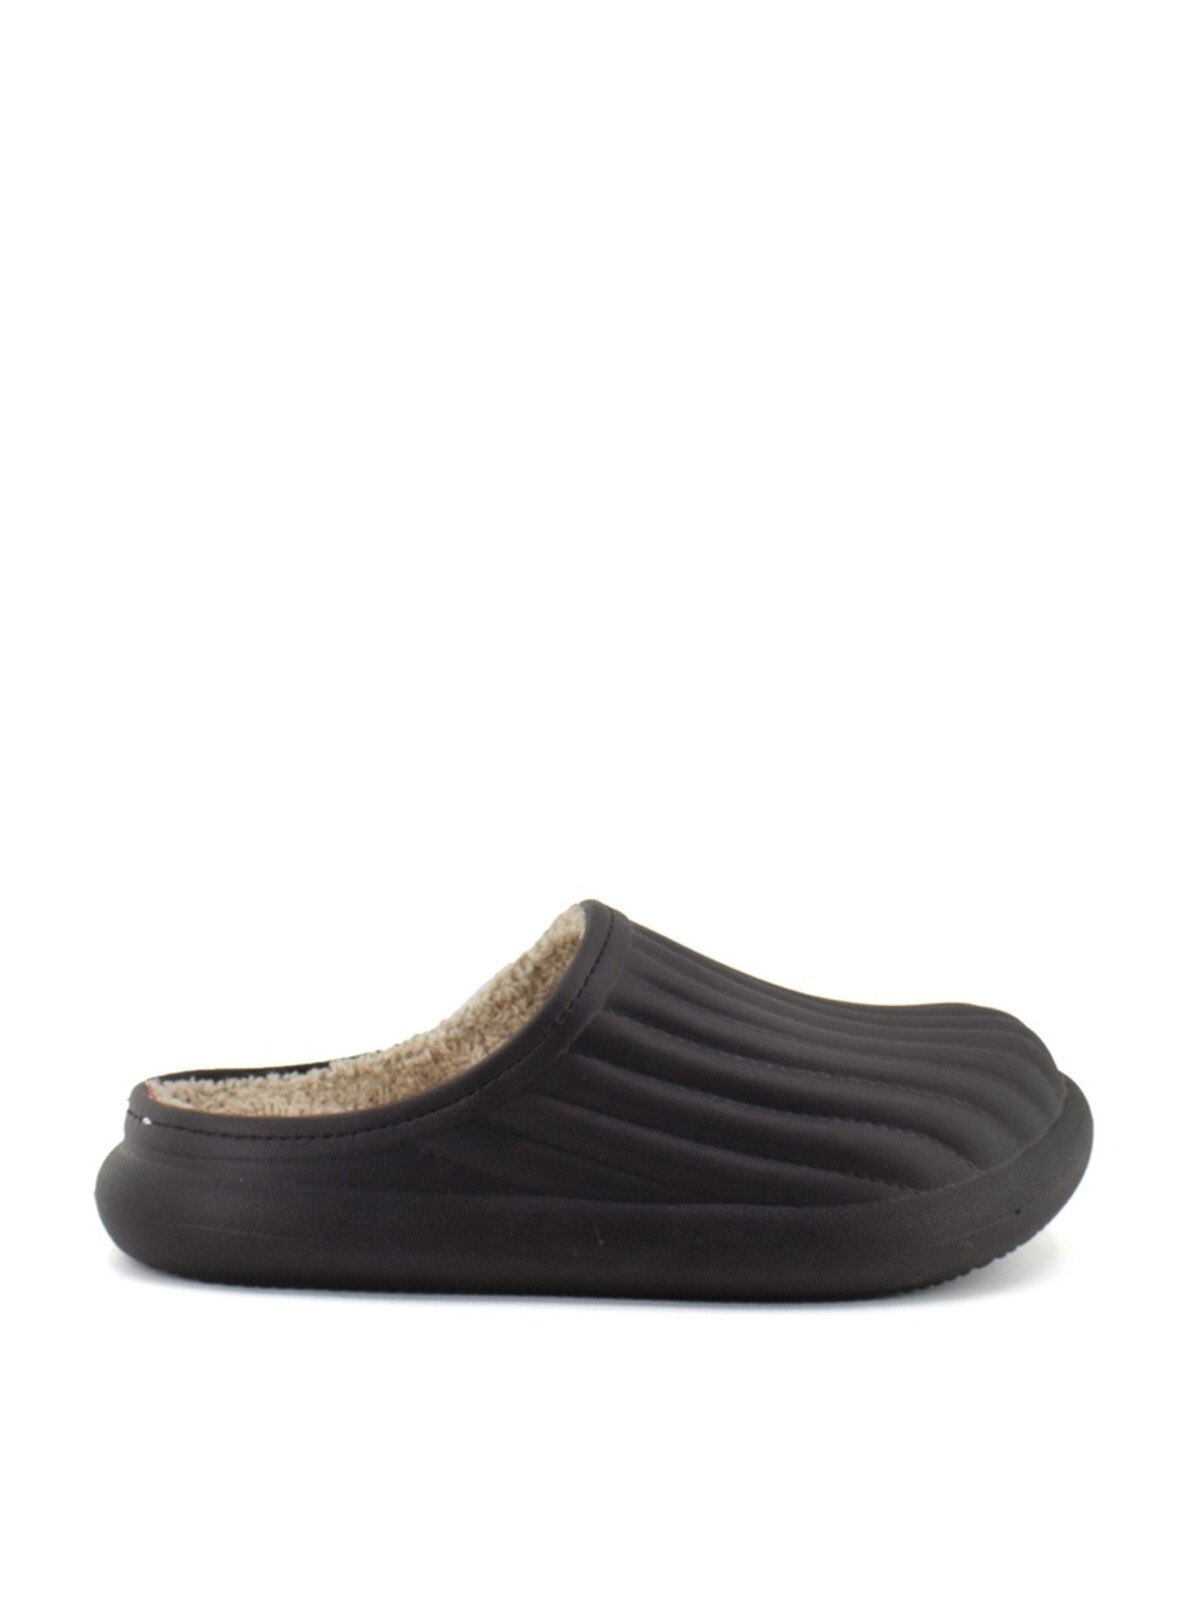 Black - Flat Slippers - Home Shoes